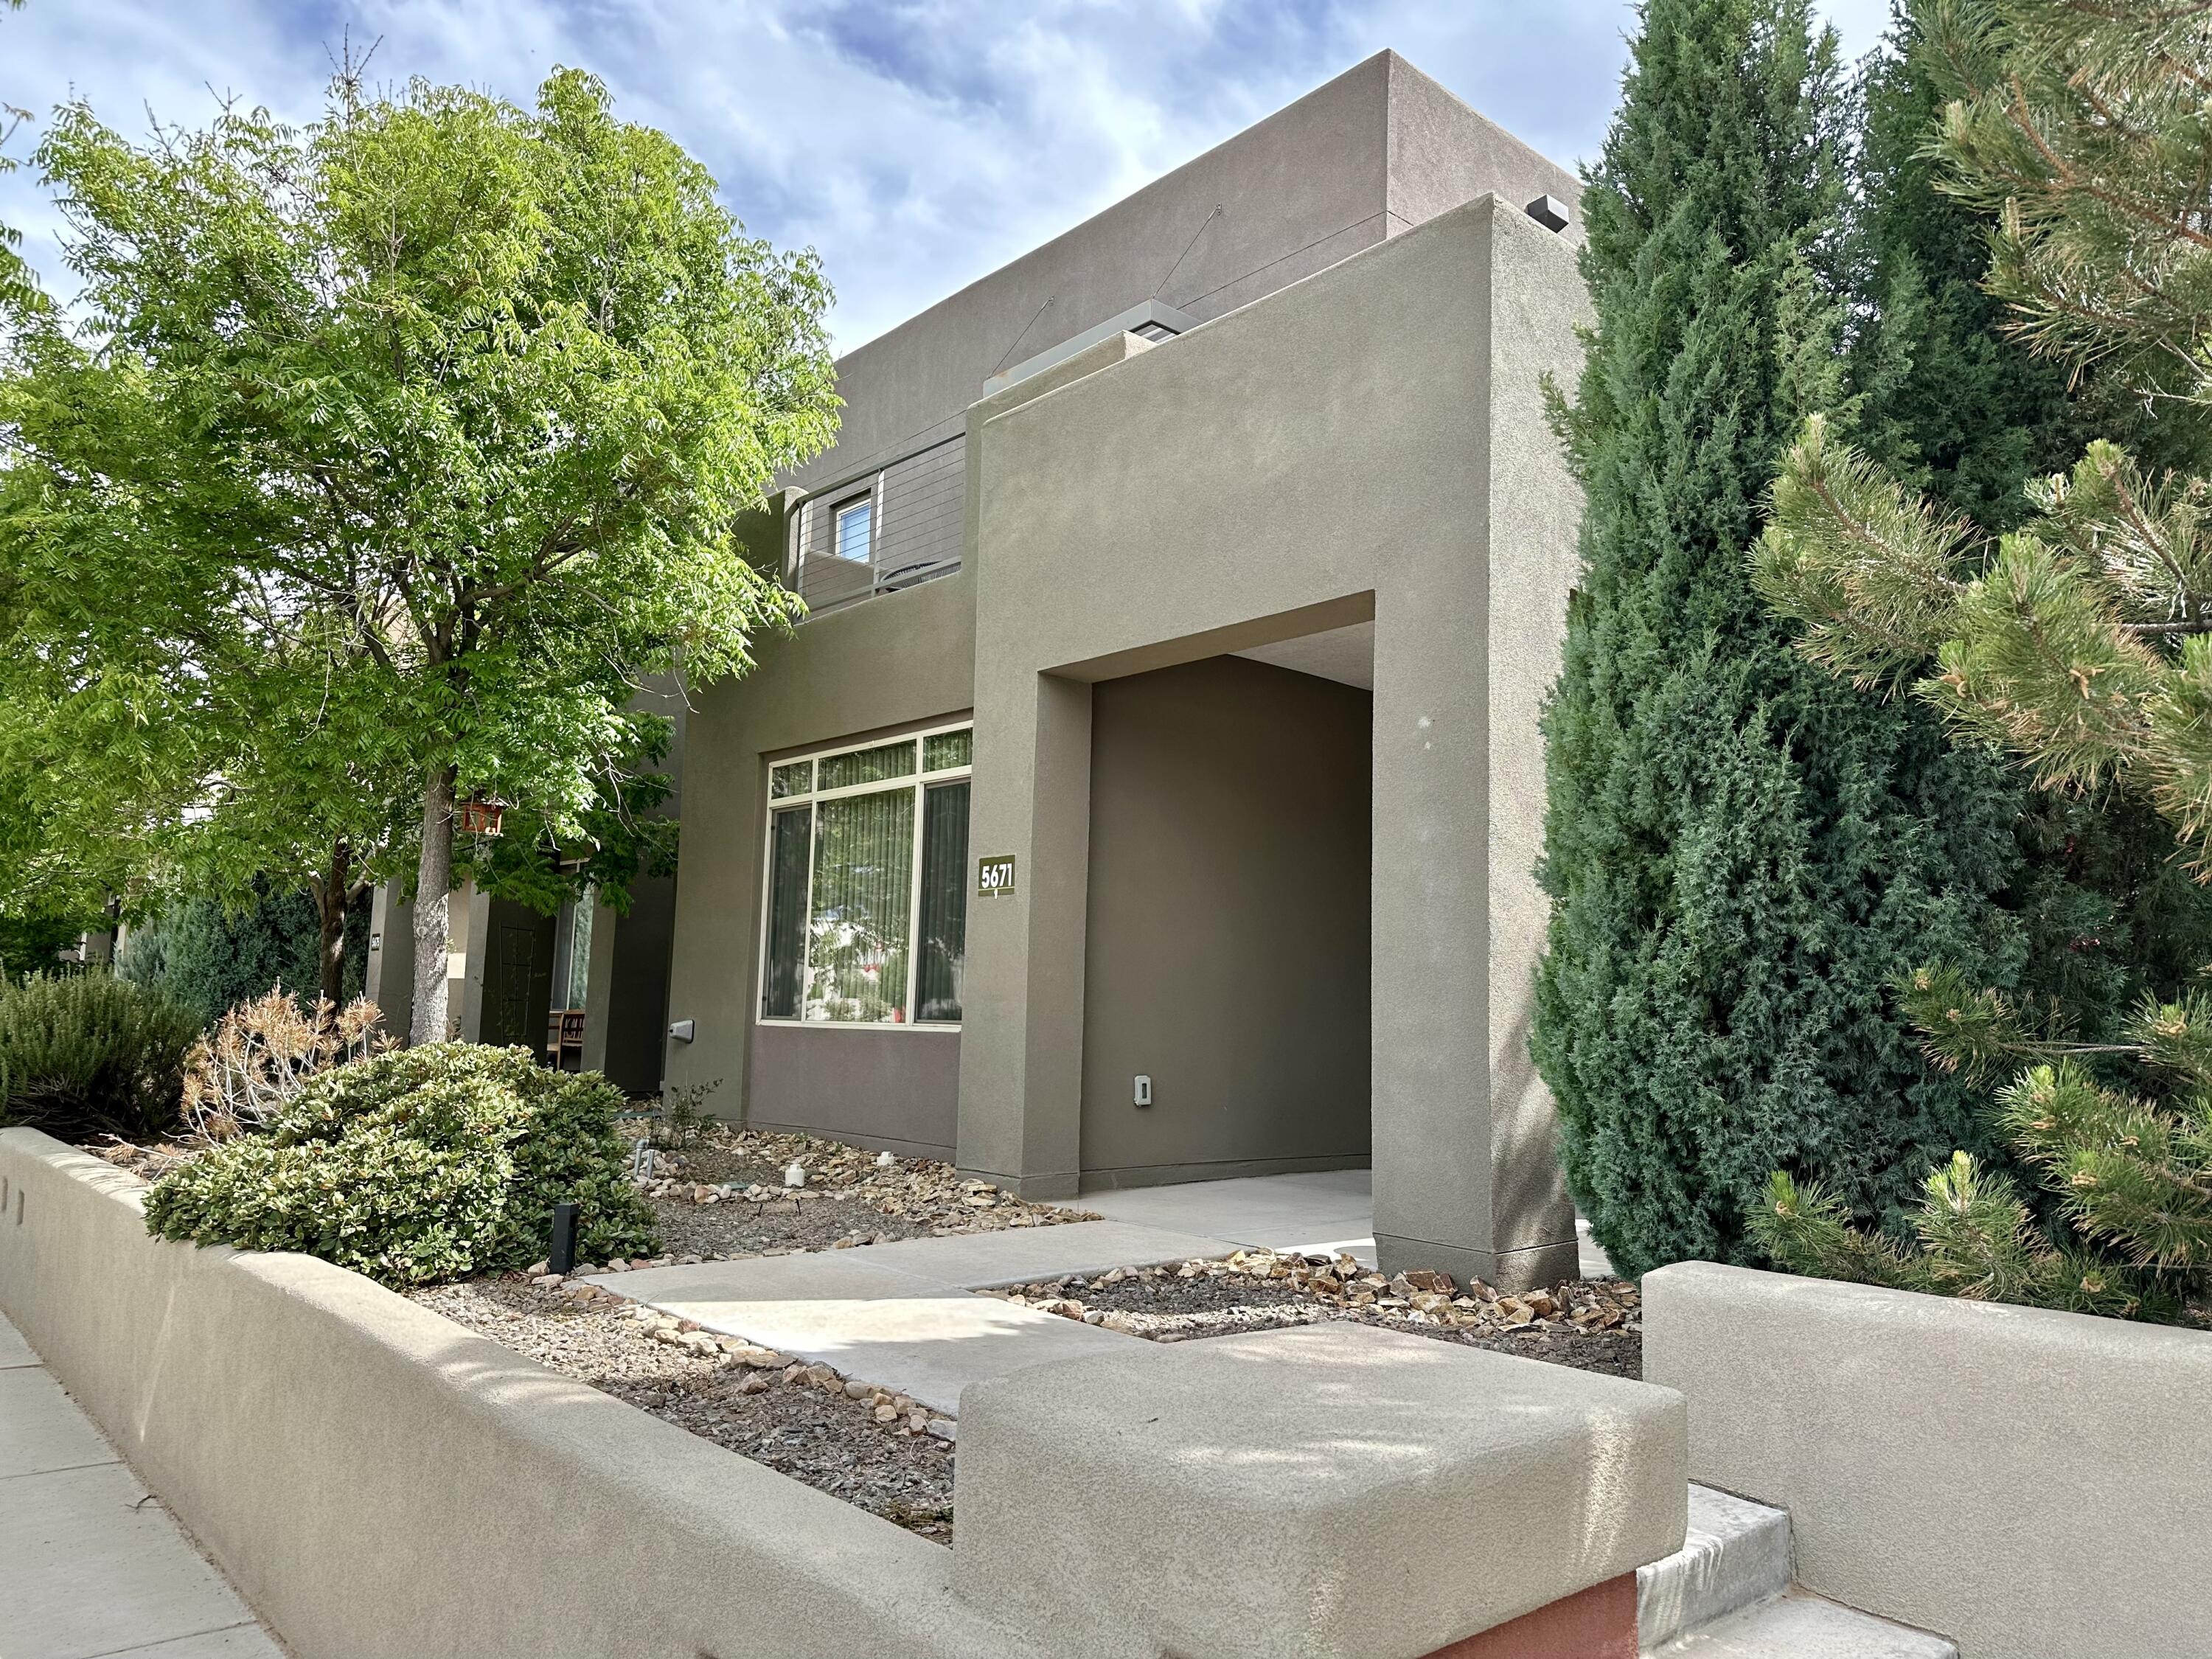 Come see this beautiful 3 bed 2 1/2 bath home in Mesa Del Sol across the street from Netflix Studios.  The open floor plan and large kitchen are ready for entertaining, and when you're guests leave enjoy a a quite moment taking in the view of the Sandia's from the master bedroom deck.  Schedule to see it before it's gone!